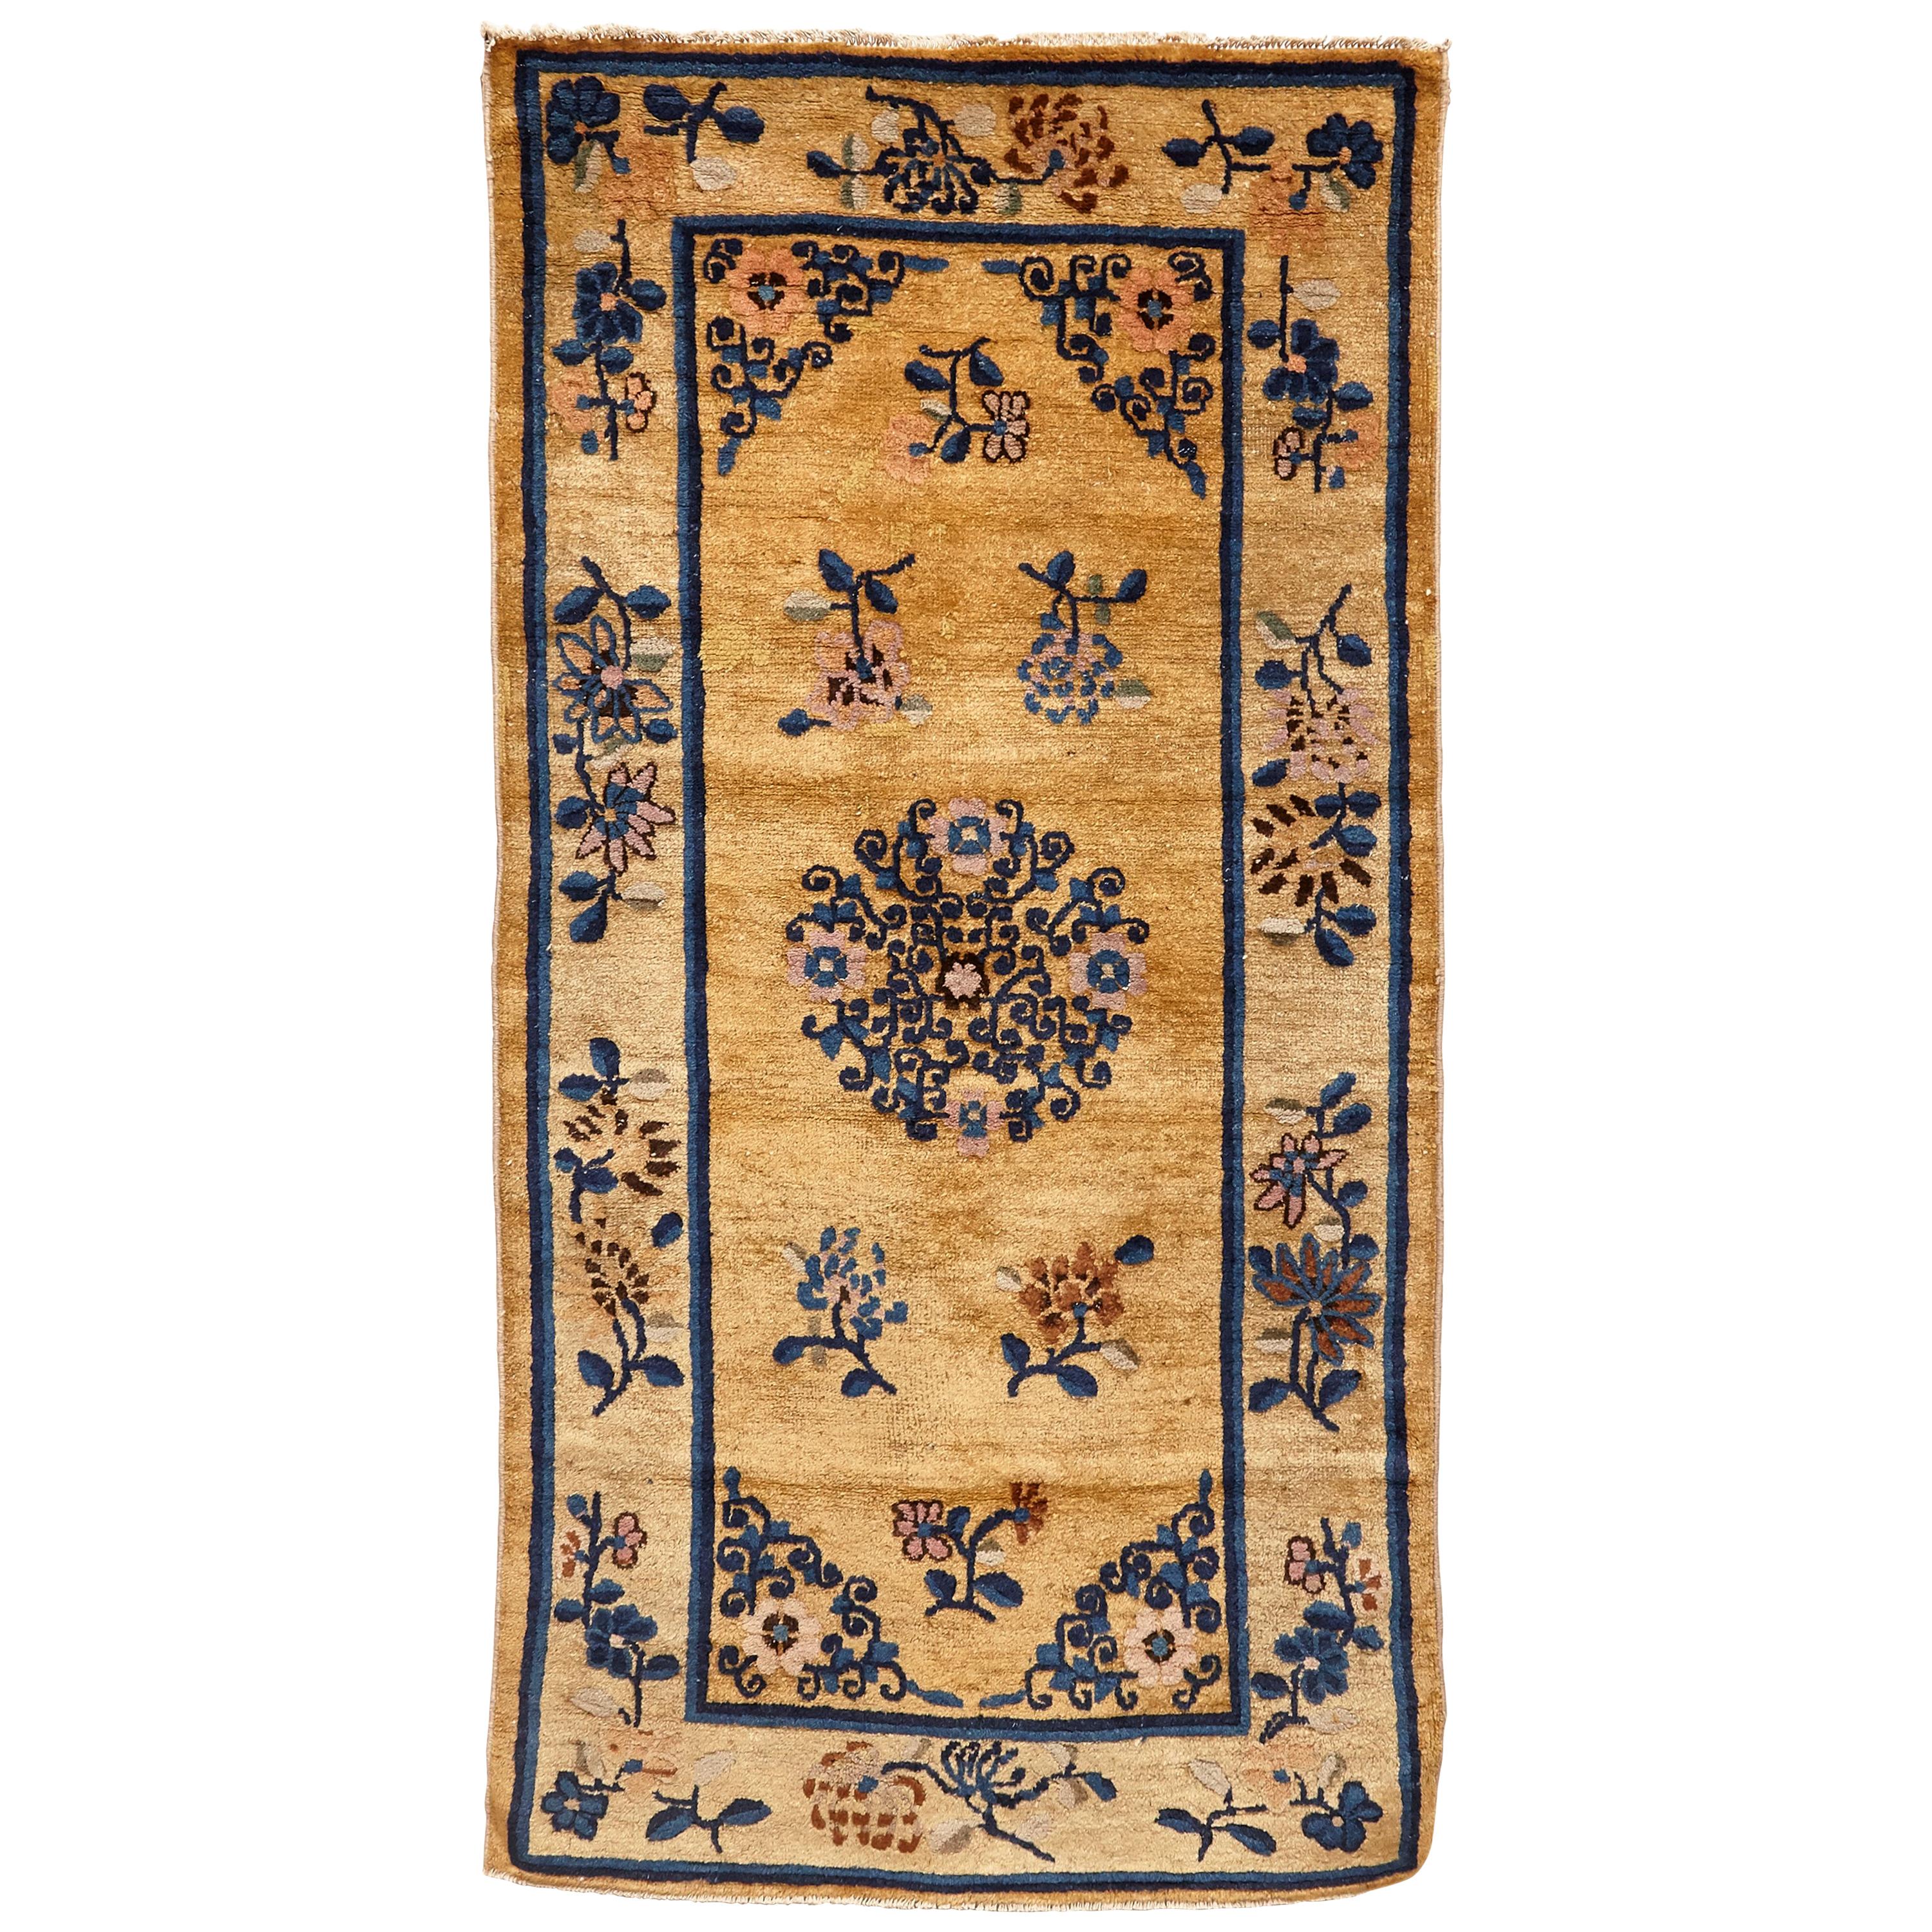 Ningshia Chinese Export Hand-Knotted Wool Antique Rug, circa 1900